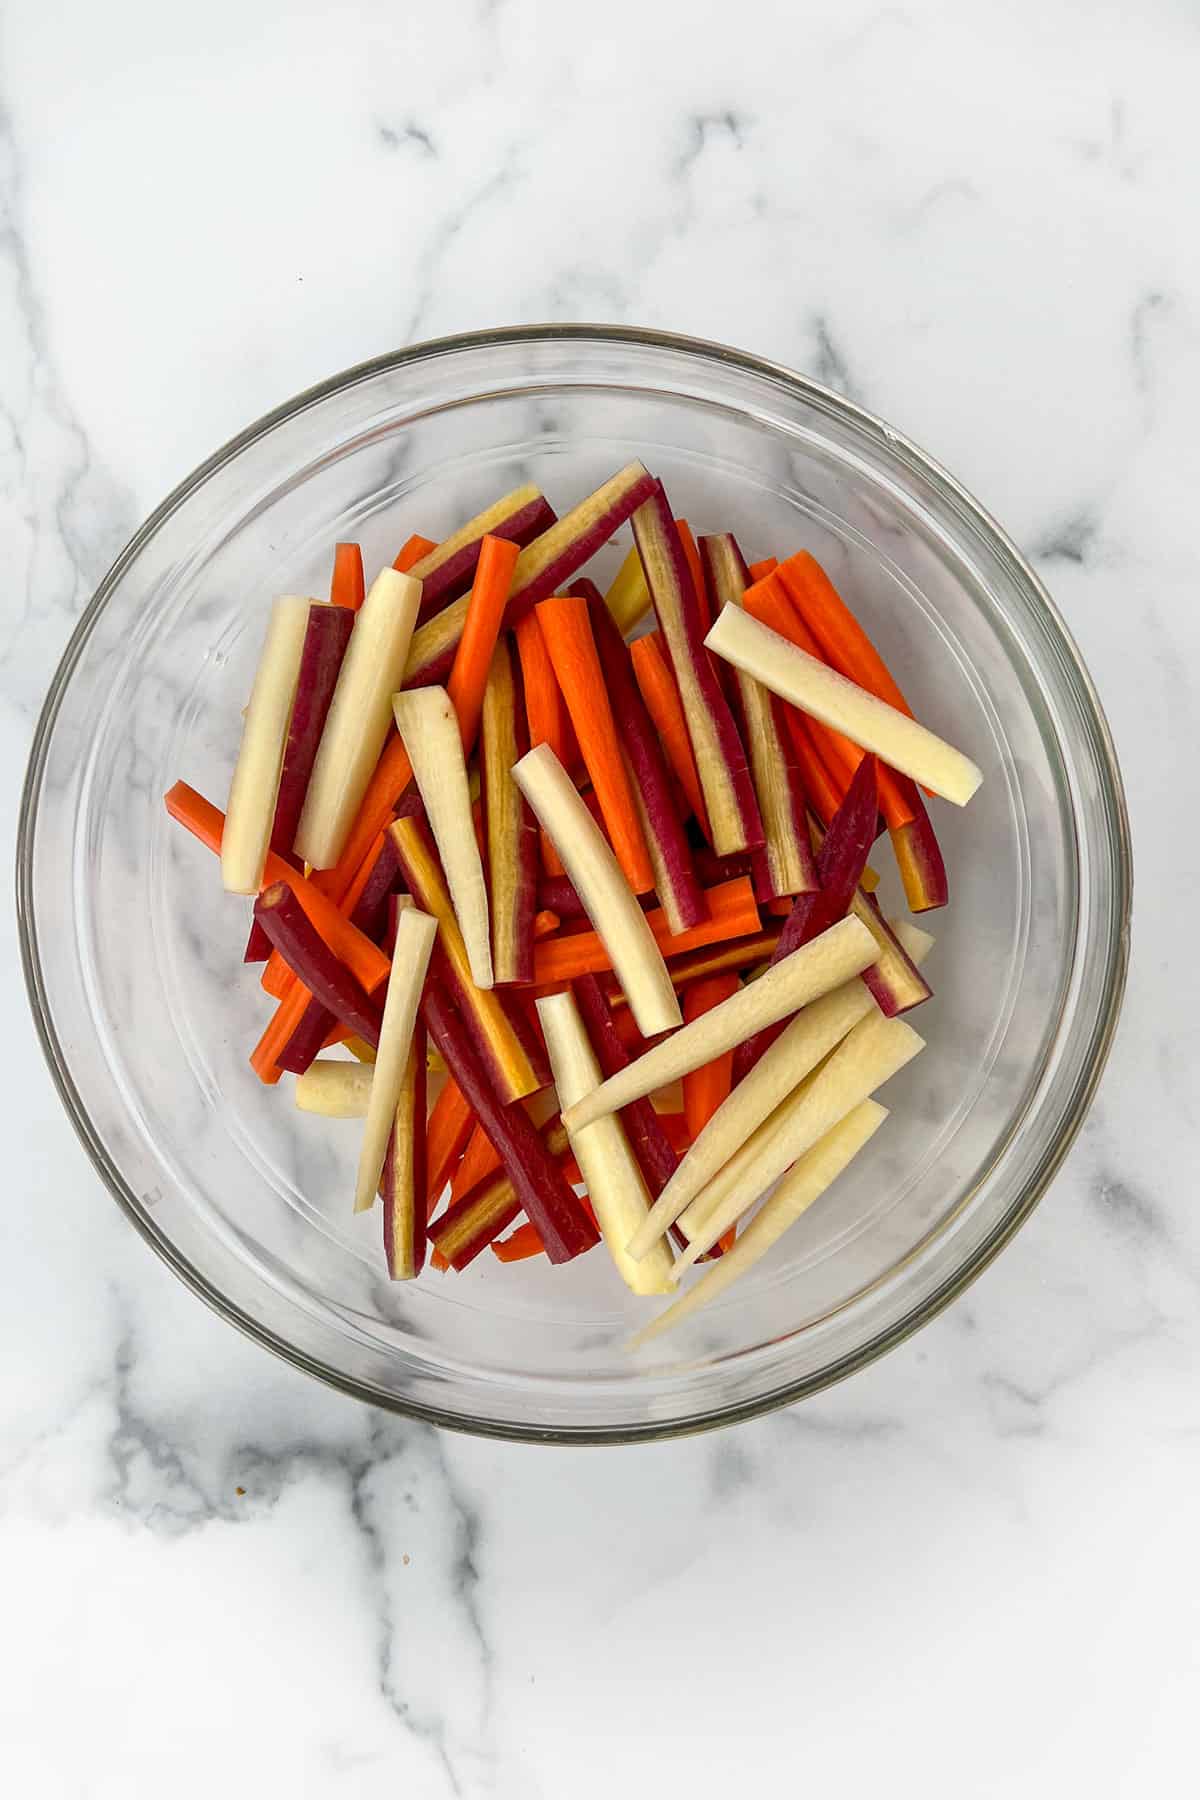 Rainbow carrot sticks in a glass mixing bowl